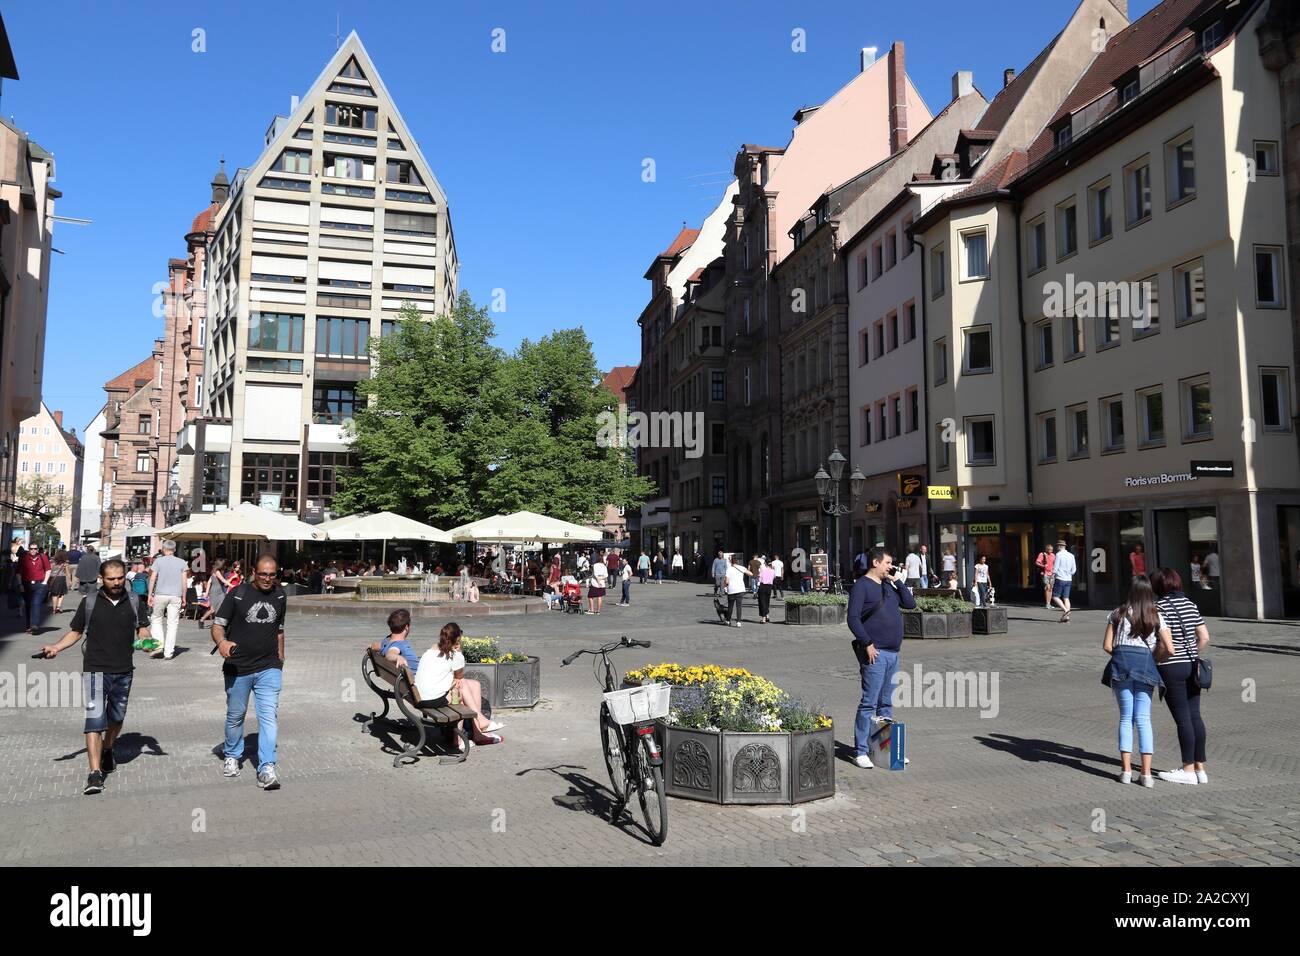 NUREMBERG, GERMANY - MAY 7, 2018: People visit Ludwigsplatz (Ludwig Square) shopping area in Nuremberg Old Town, Germany. Stock Photo